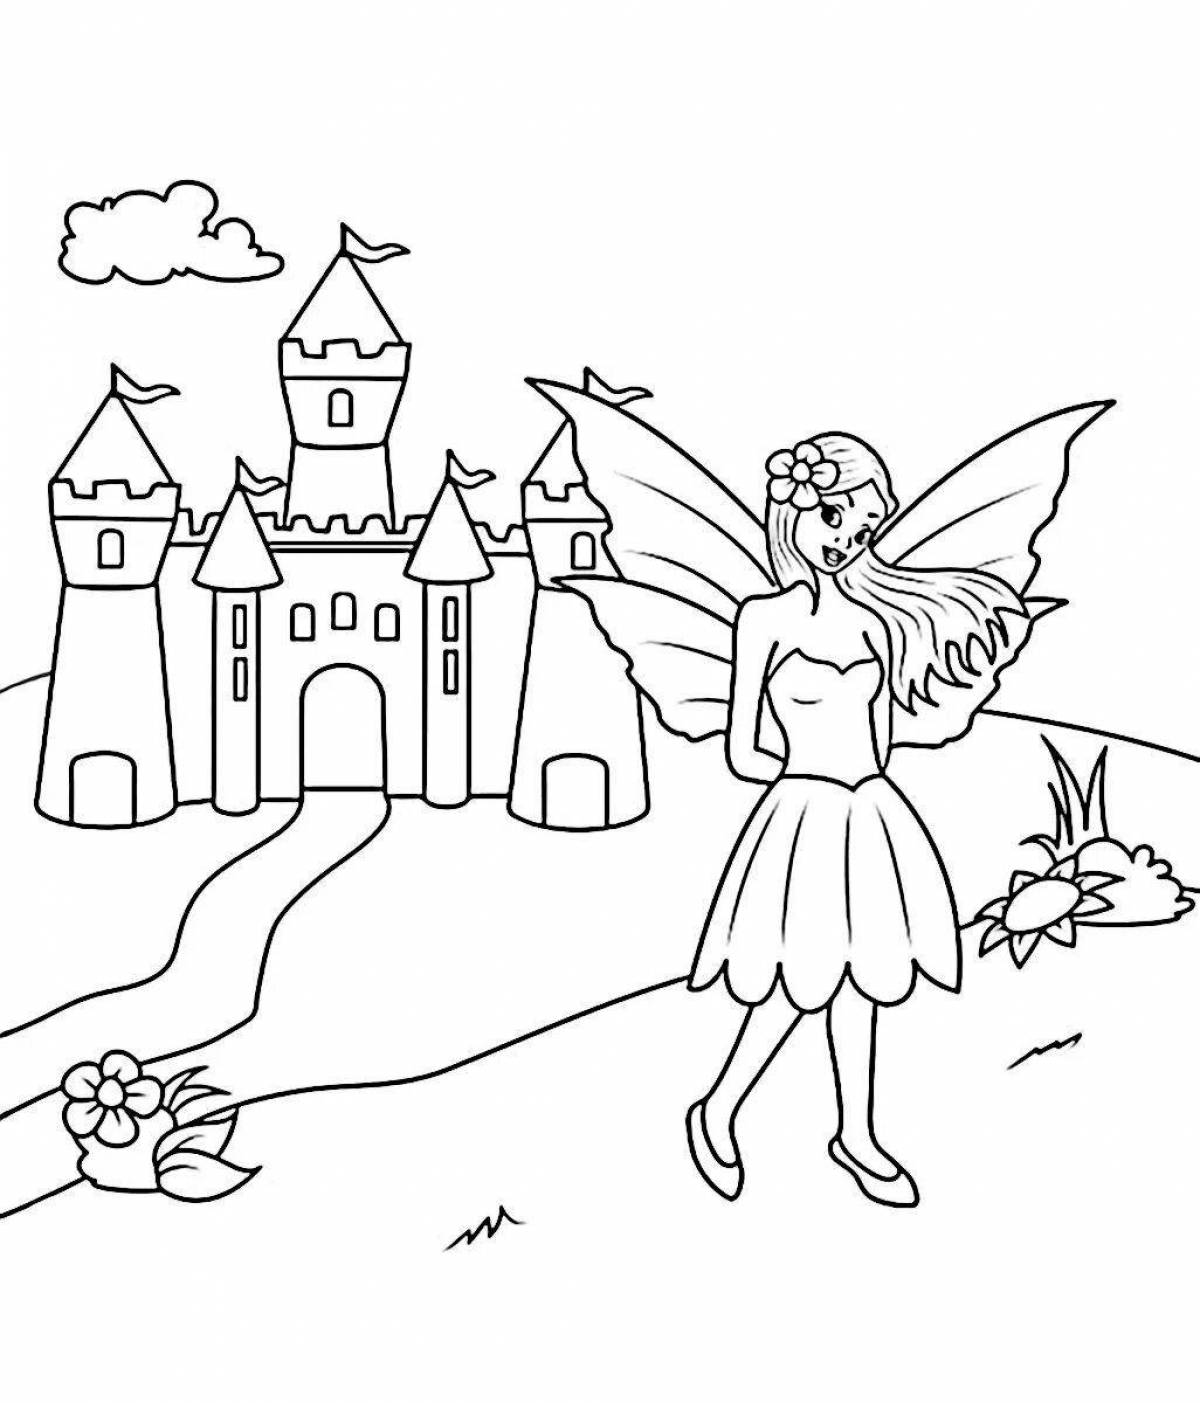 Exquisite castle coloring book for girls